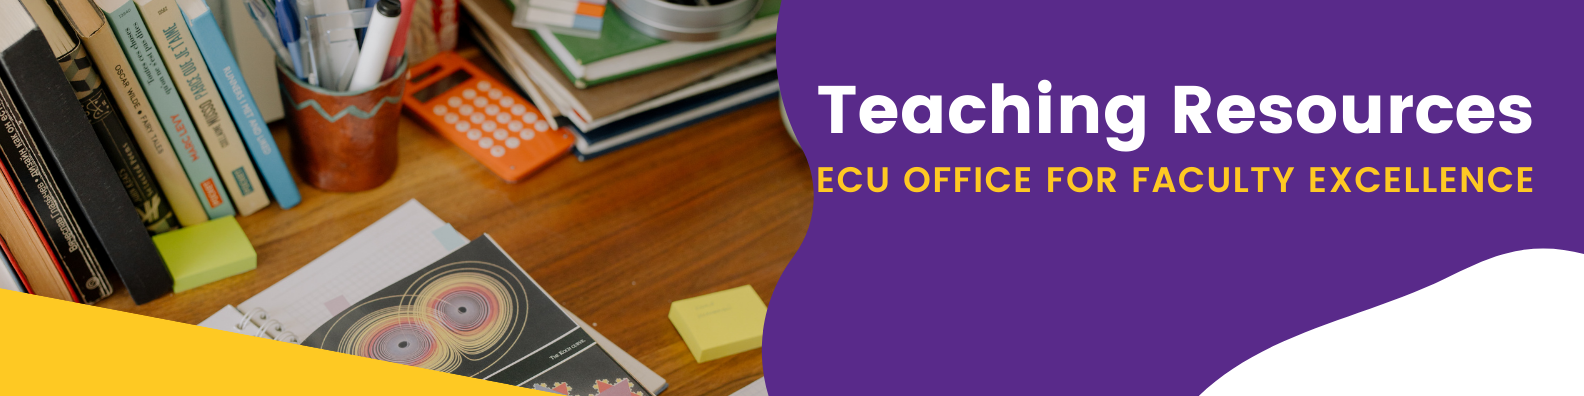 Teaching Resources Banner